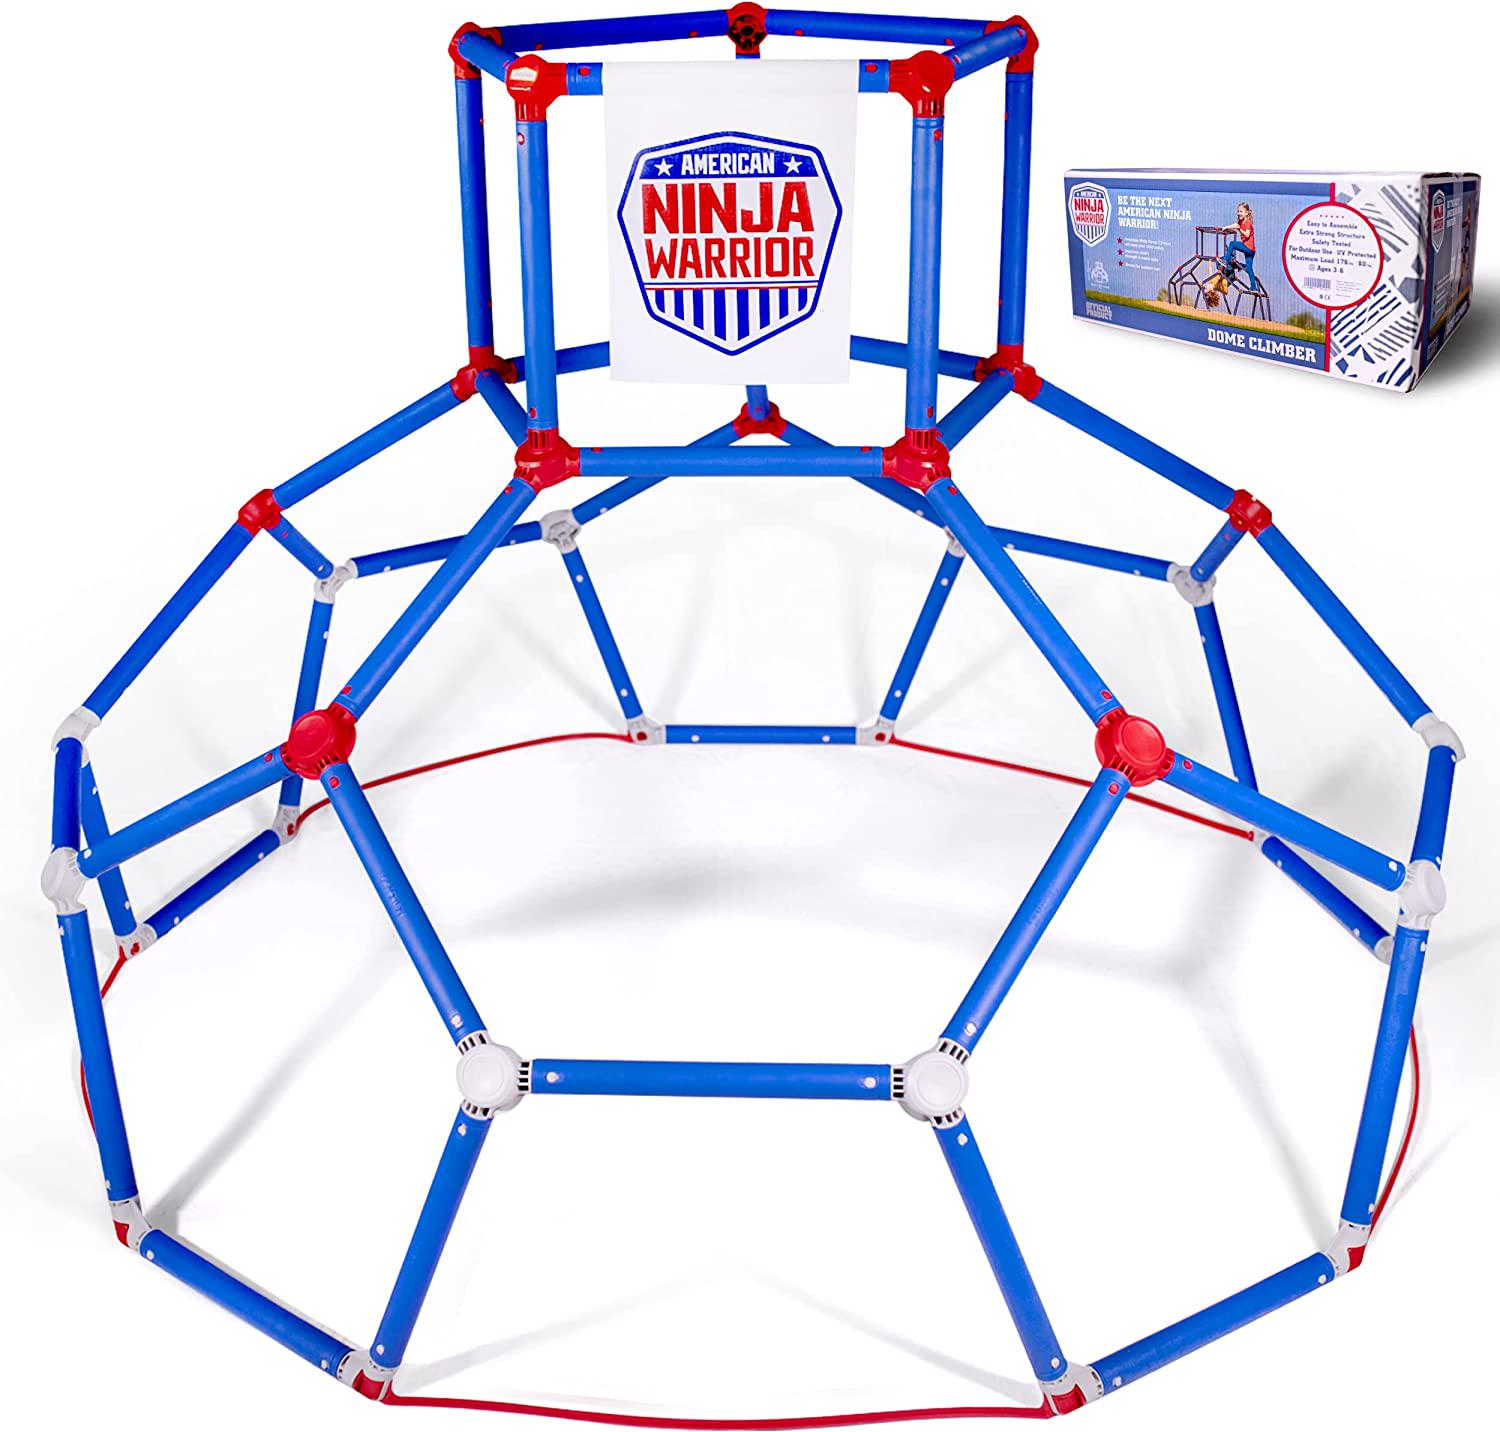 Lil' monkey, Lil' Monkey American Ninja Warrior Dome Climber, Extra Strong but Lightweight 18 Lbs Climbing Dome , 67 x 67 x 46.5 Inches Jungle Gym, All-Weather Construction for Toddlers Aged 3 to 6